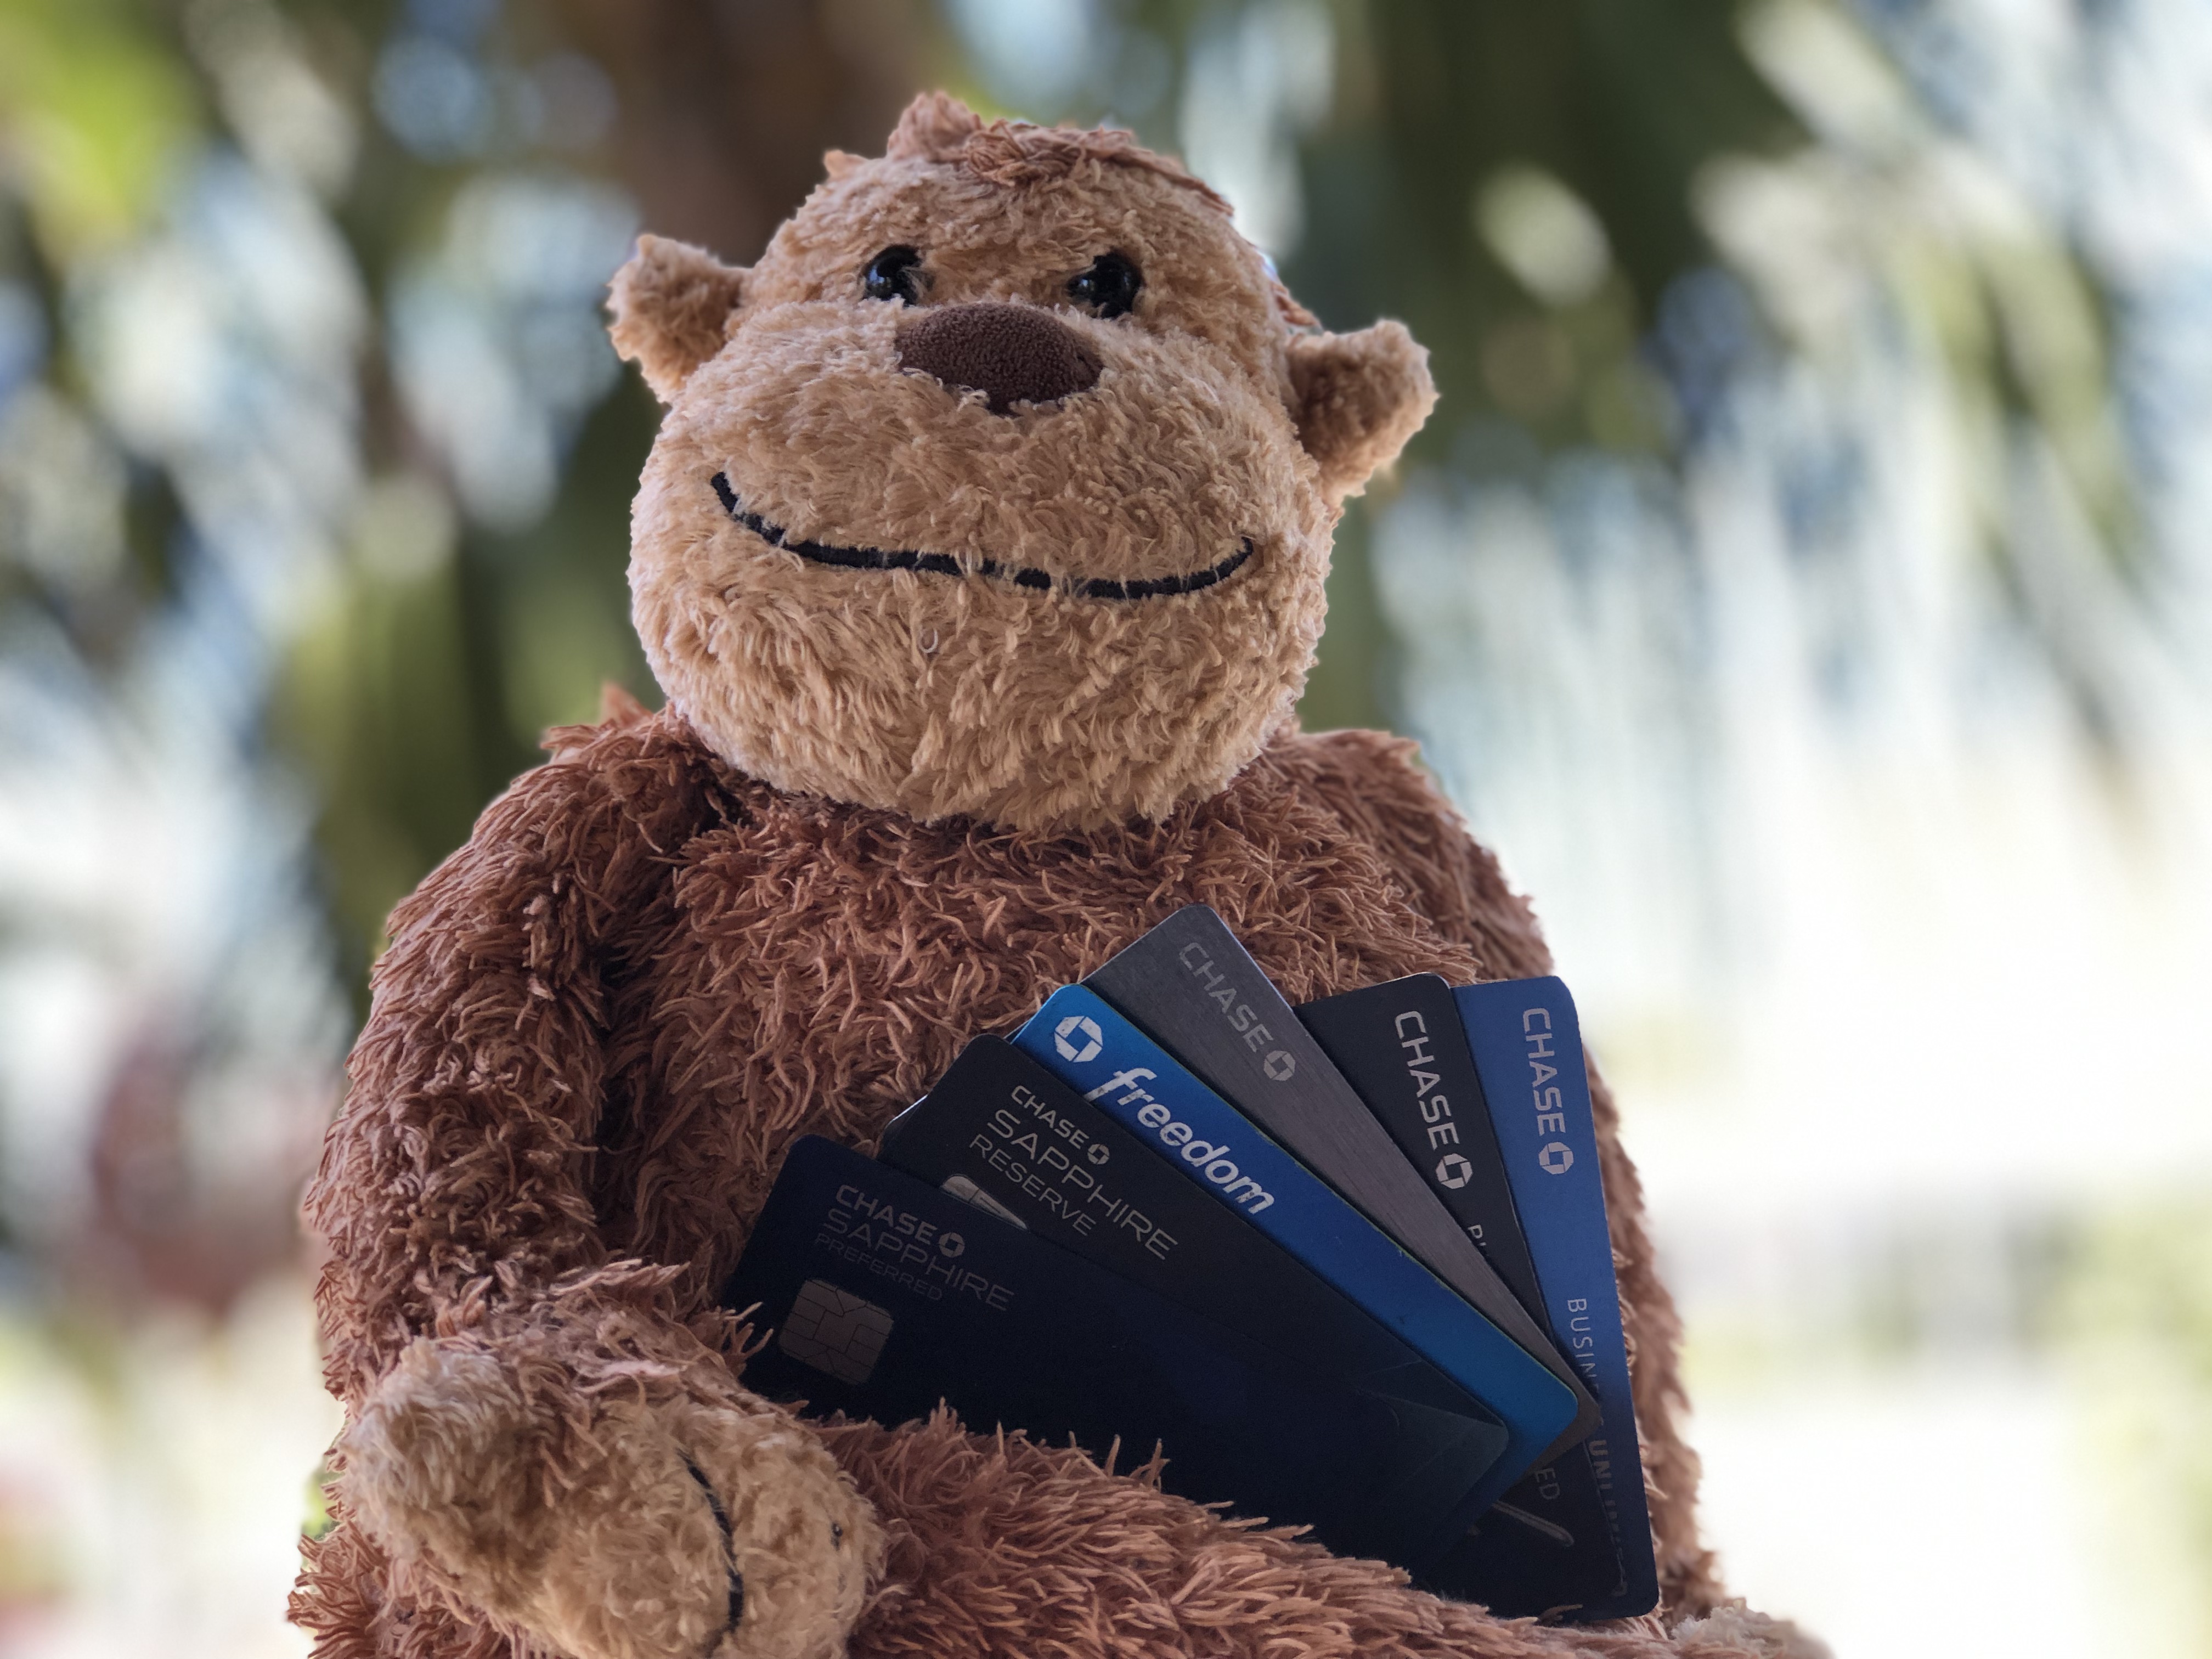 a stuffed monkey holding credit cards